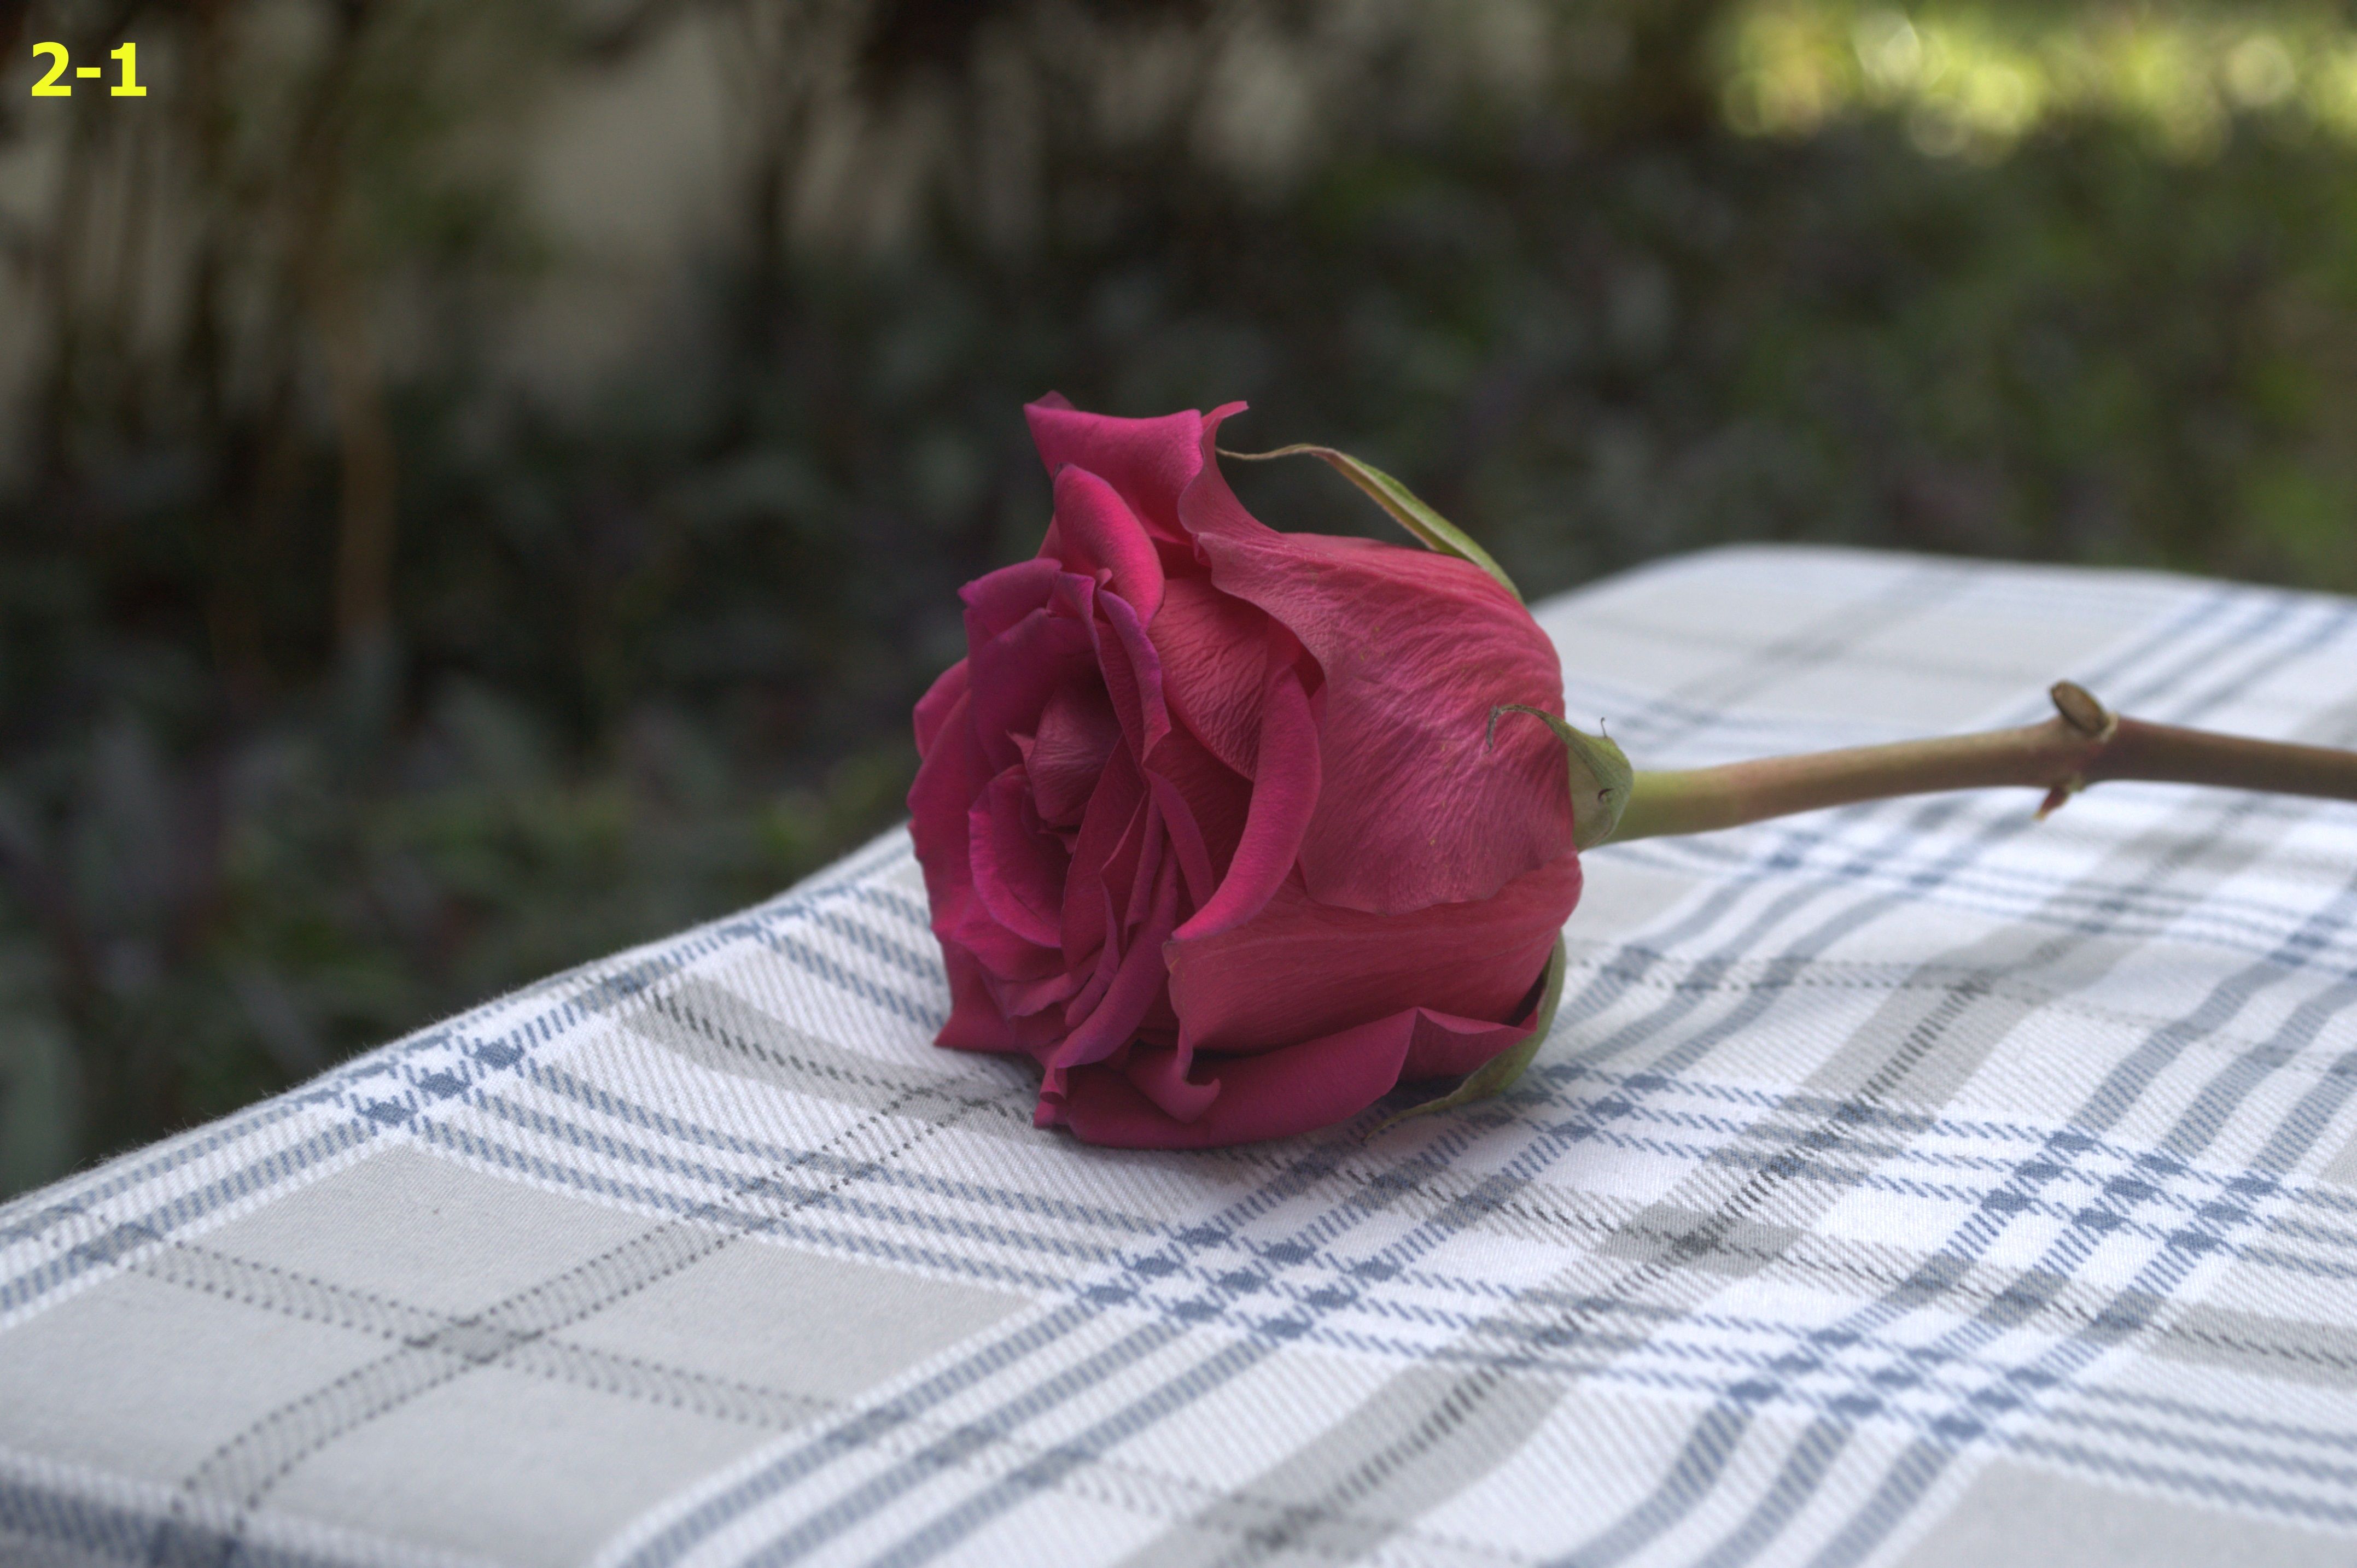 Red rose on table